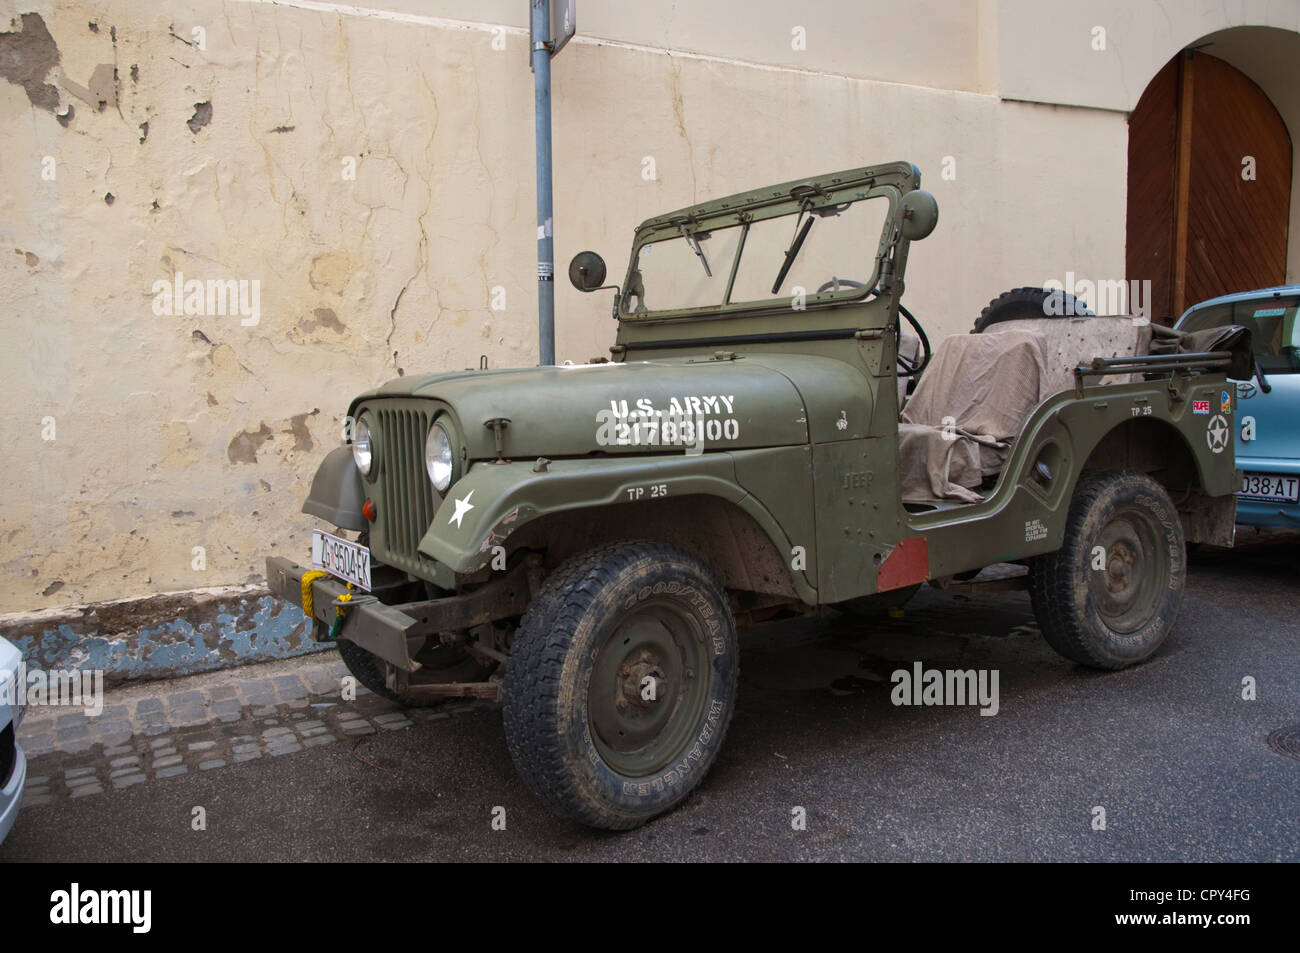 US American army military jeep vehicle used as a private car Zagreb Croatia Europe Stock Photo